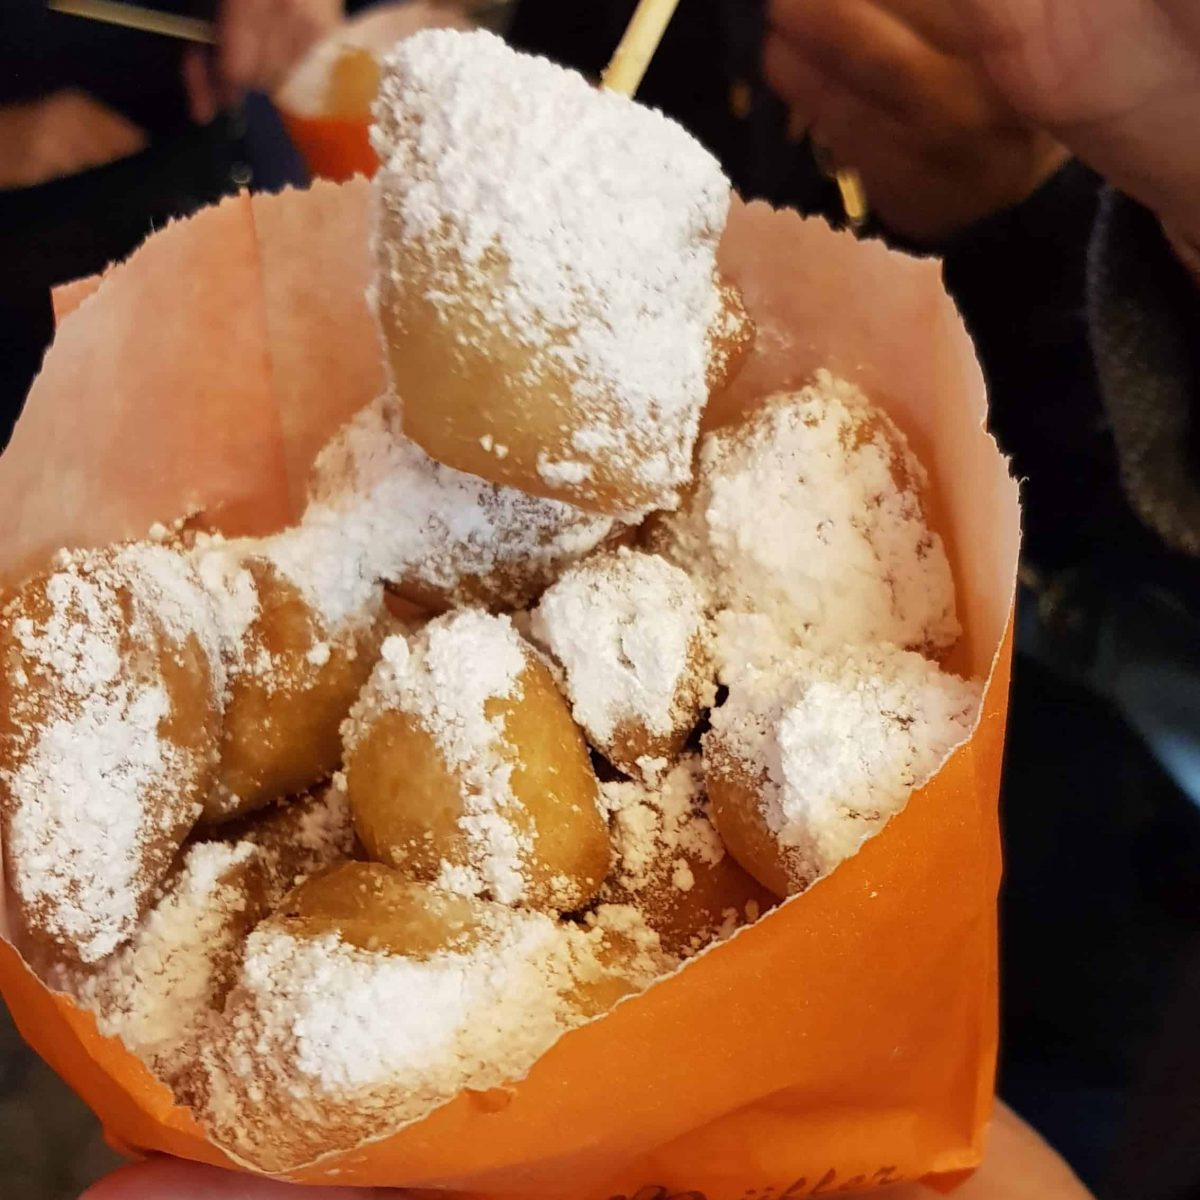 Schmalzkuchen (Donuts in a bag) at a German Christmas Market